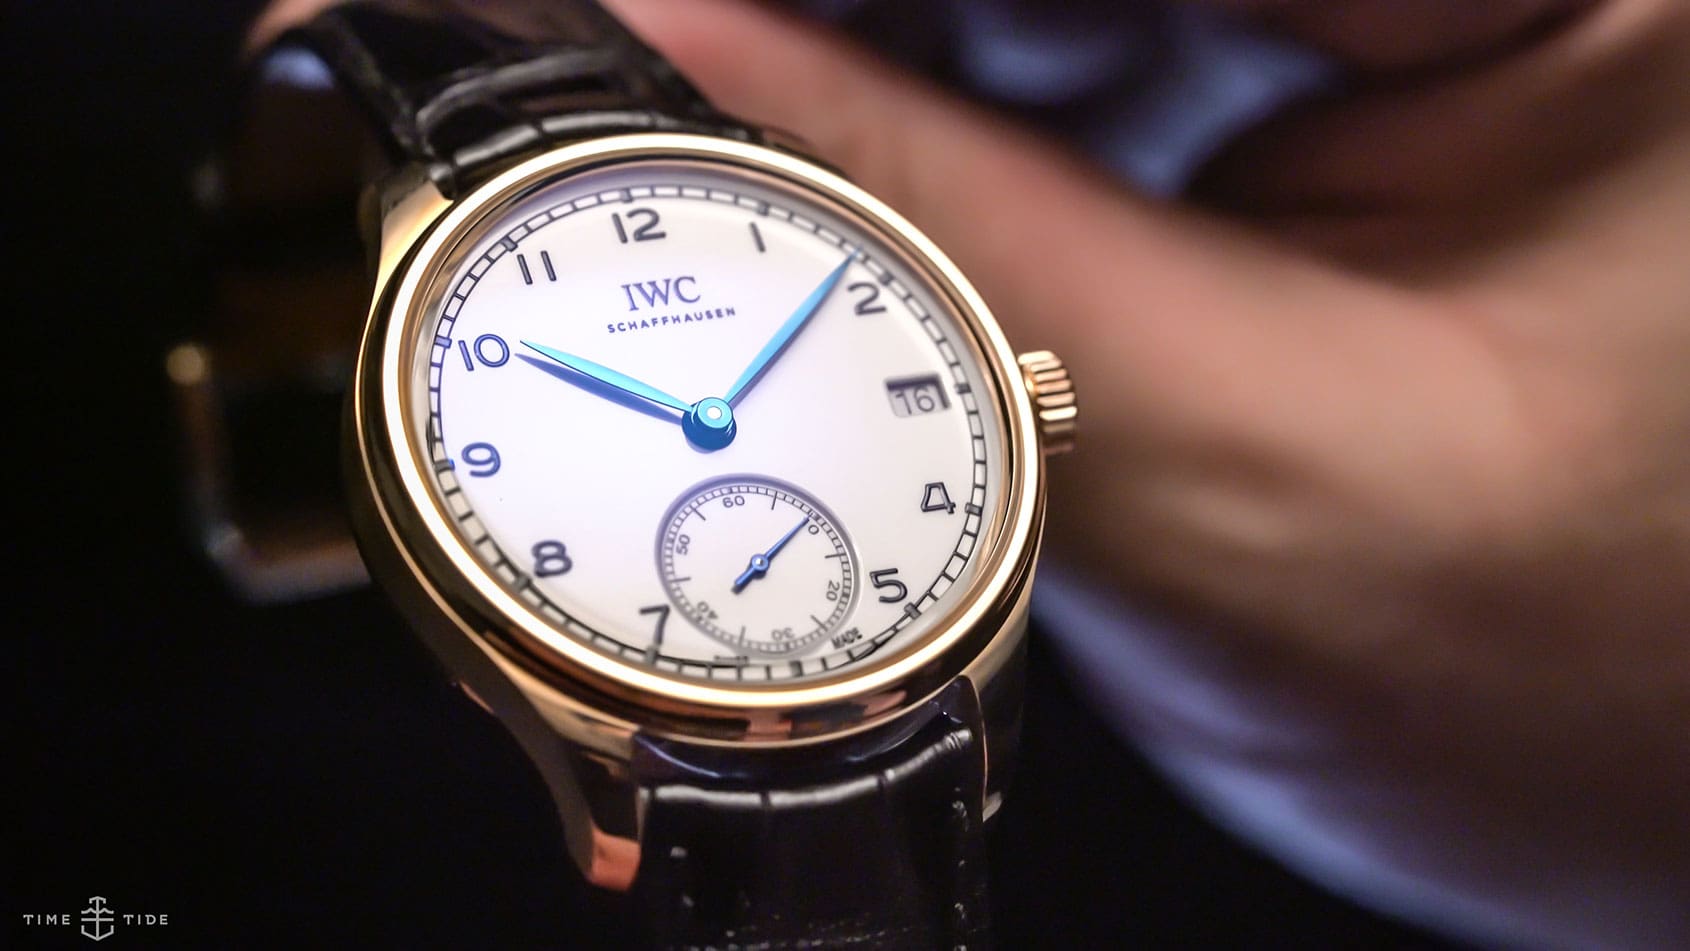 VIDEO: A classical beauty – IWC’s Portugieser Hand-Wound Eight Days Edition “150 Years” 